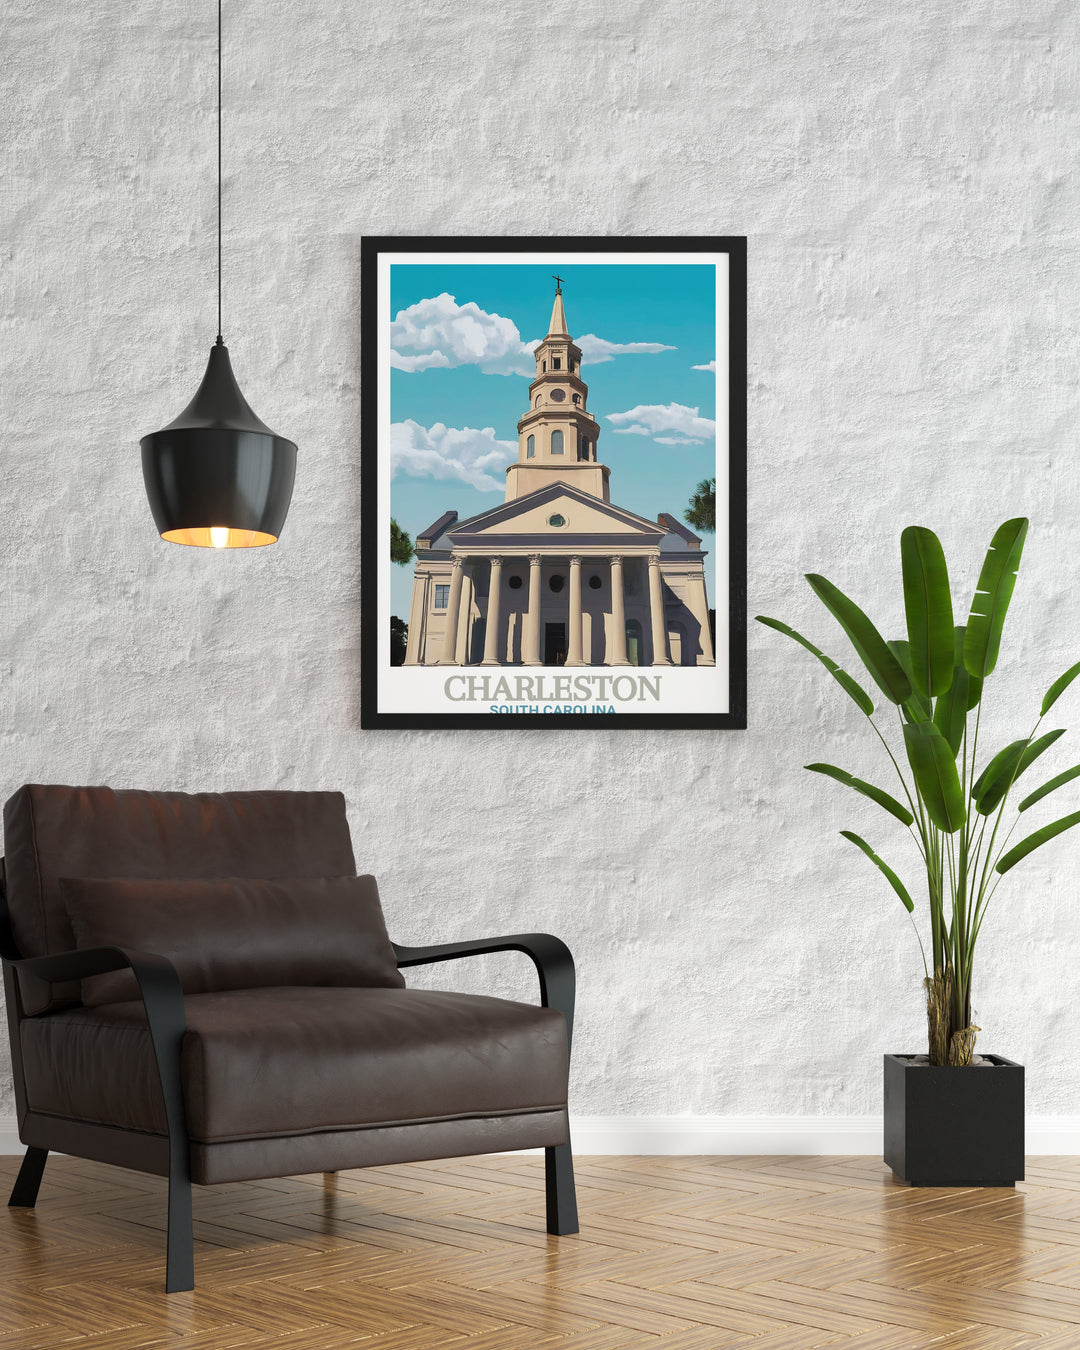 St. Michaels Church travel print highlighting the historic beauty and intricate details of Charleston perfect for wall art and home decor that evokes fond memories and inspires future travels